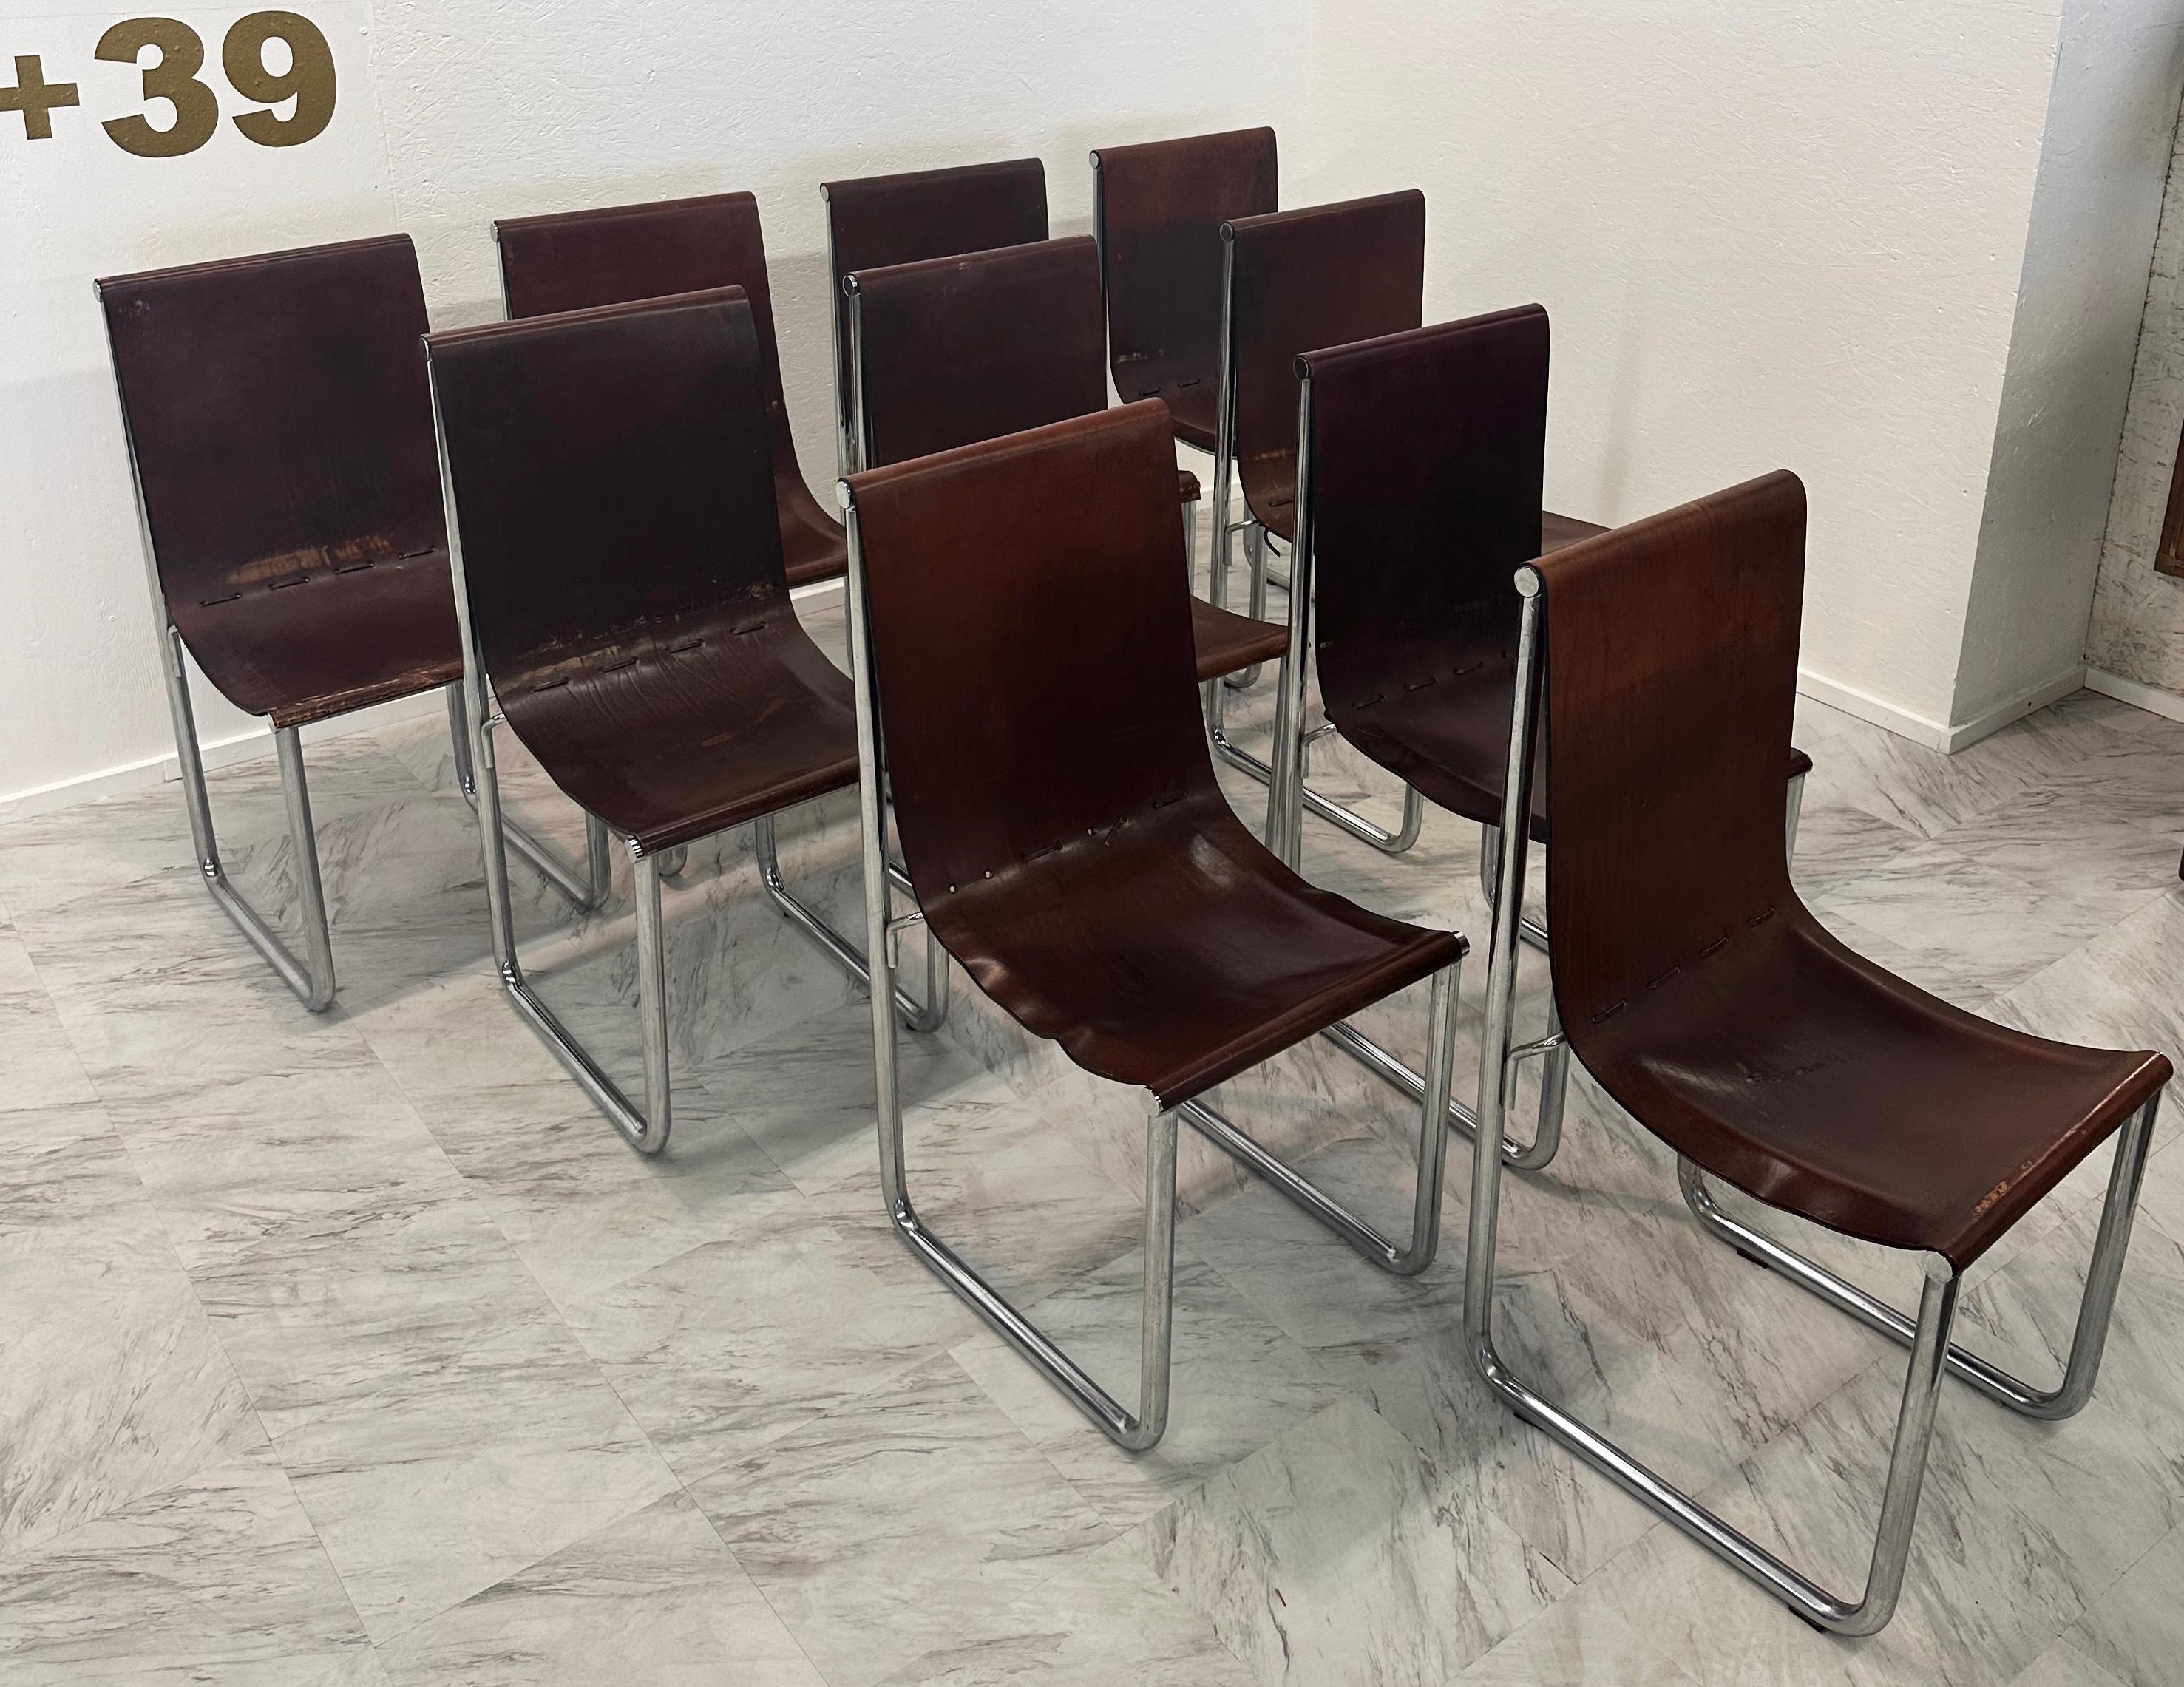  A set of 10 Mid Century Italian Leather and Chrome Dining Chairs from the 1980s is a stylish and iconic collection of dining chairs. These chairs typically feature sleek chrome frames that provide a modern and elegant look, paired with high-quality